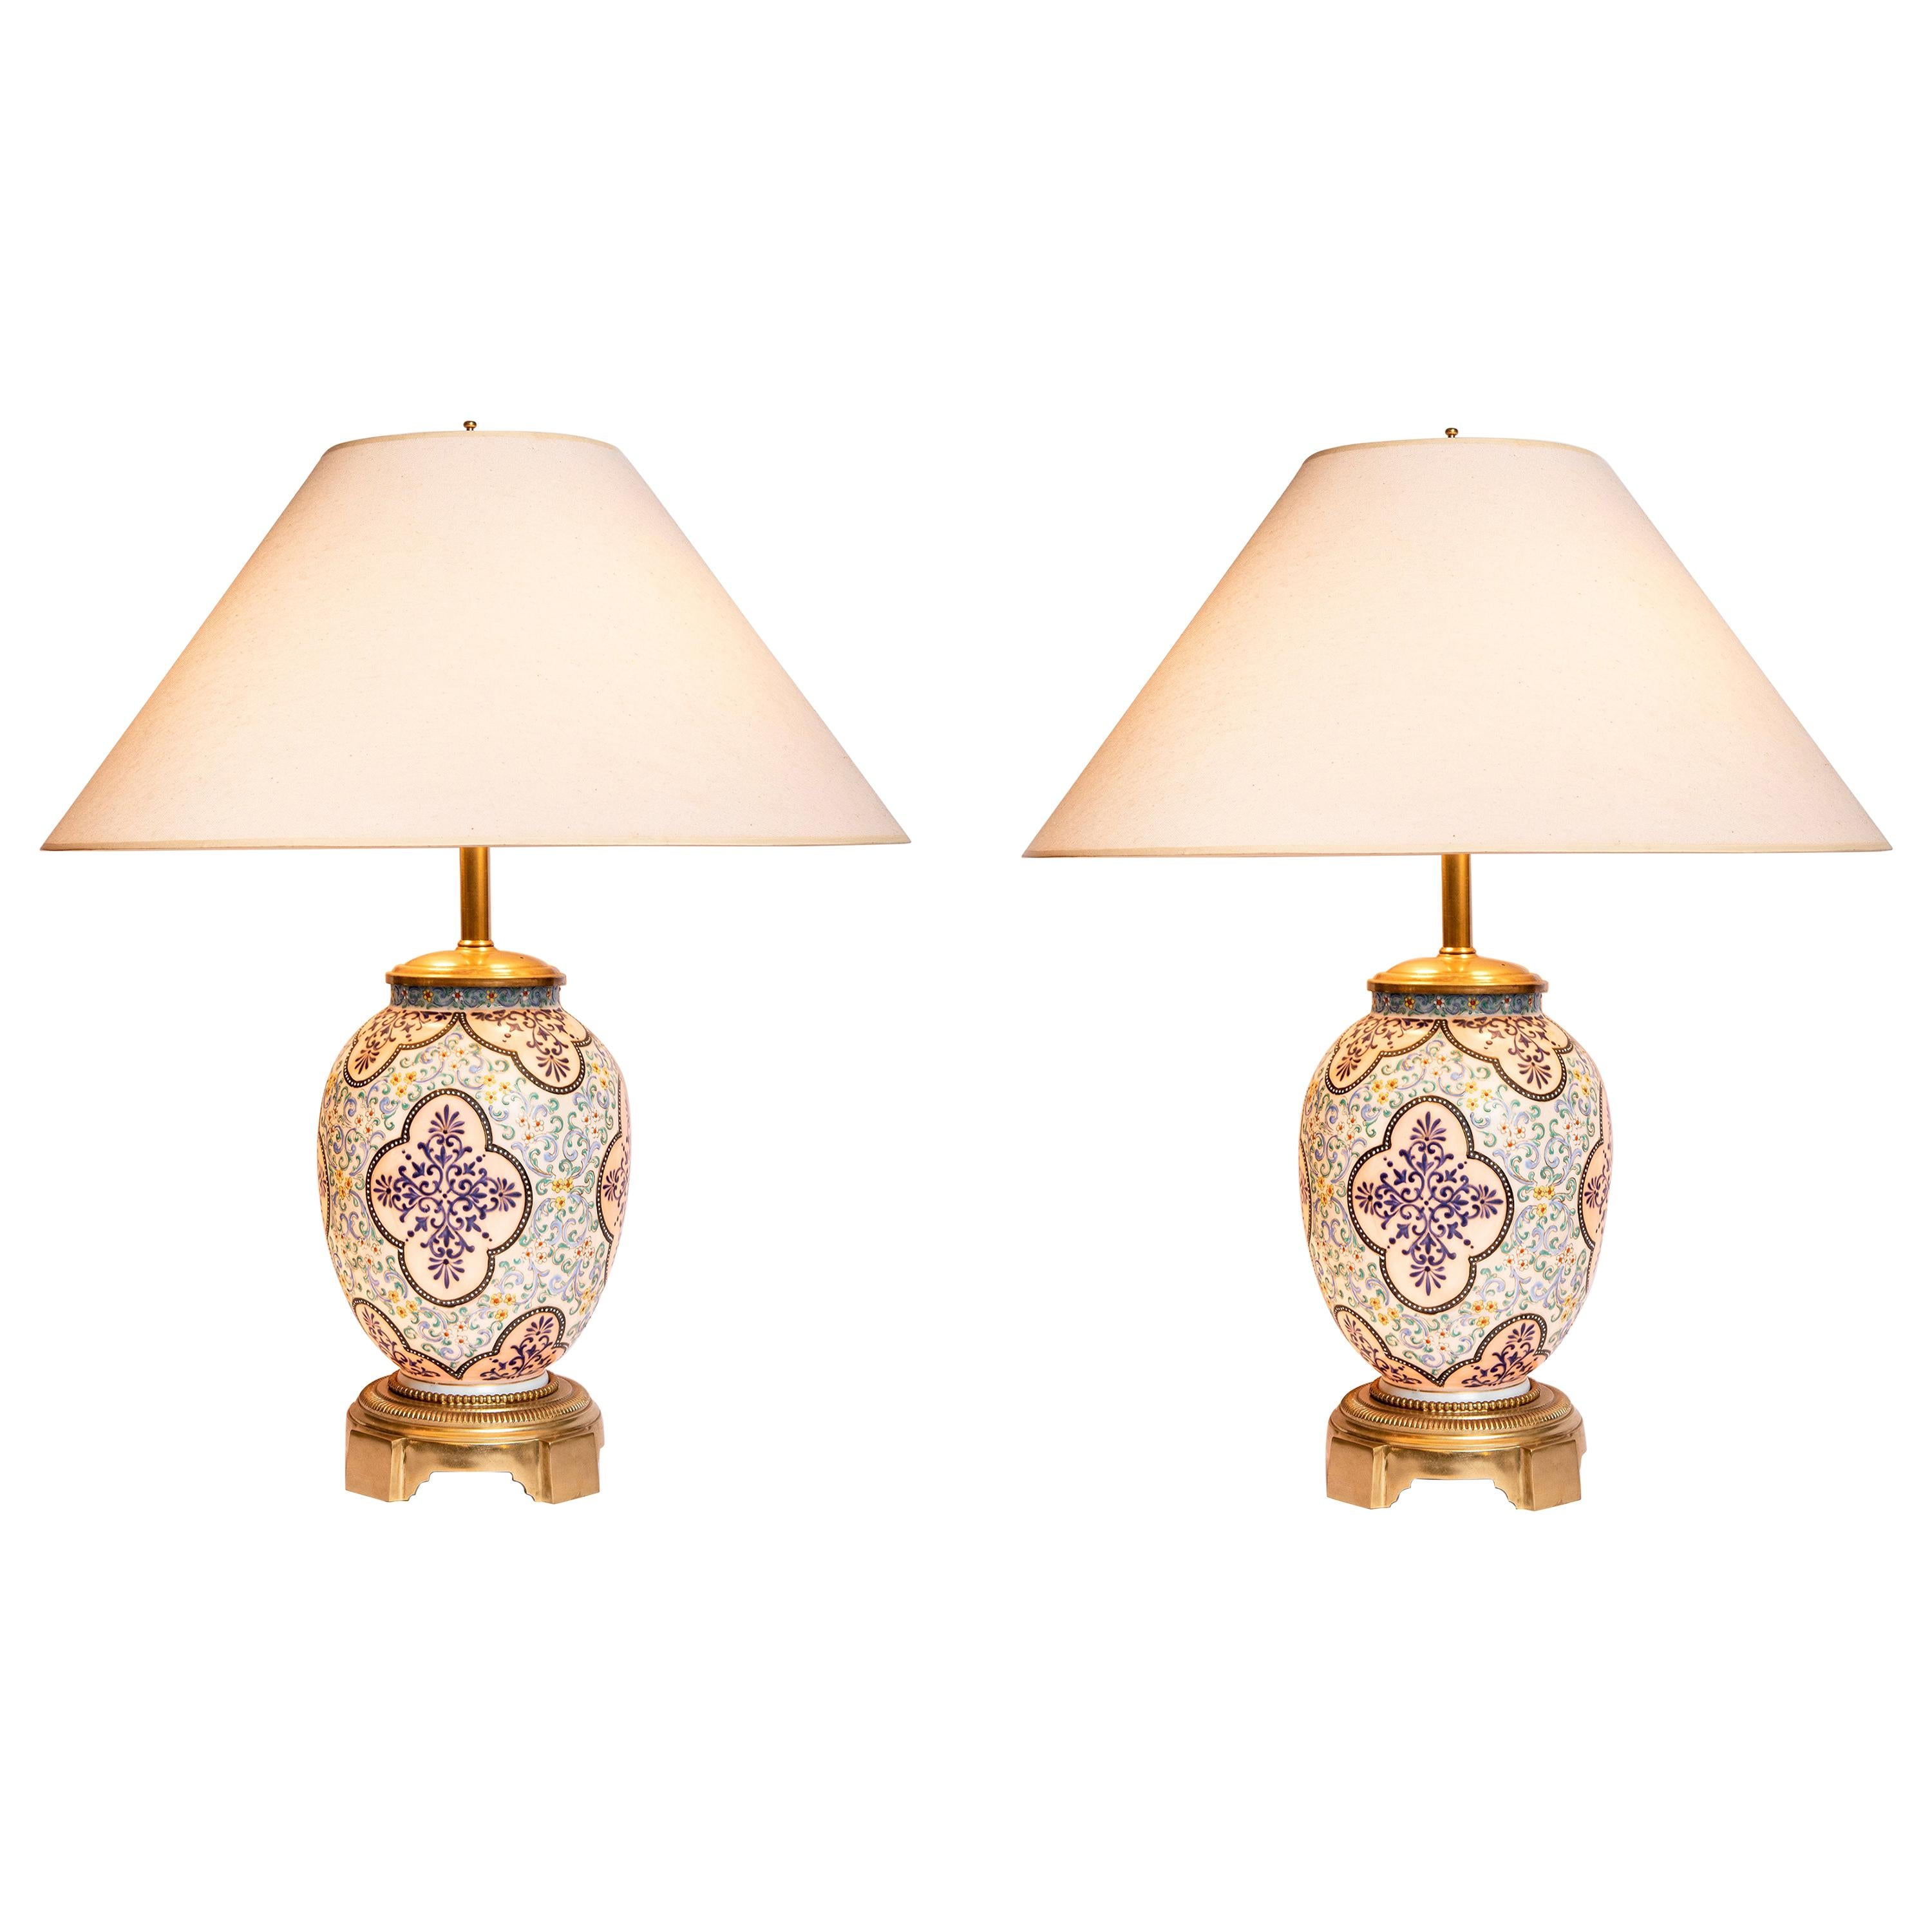 Pair of Painted Opaline and Bronze Table Lamps, Czech, Late 19th Century For Sale